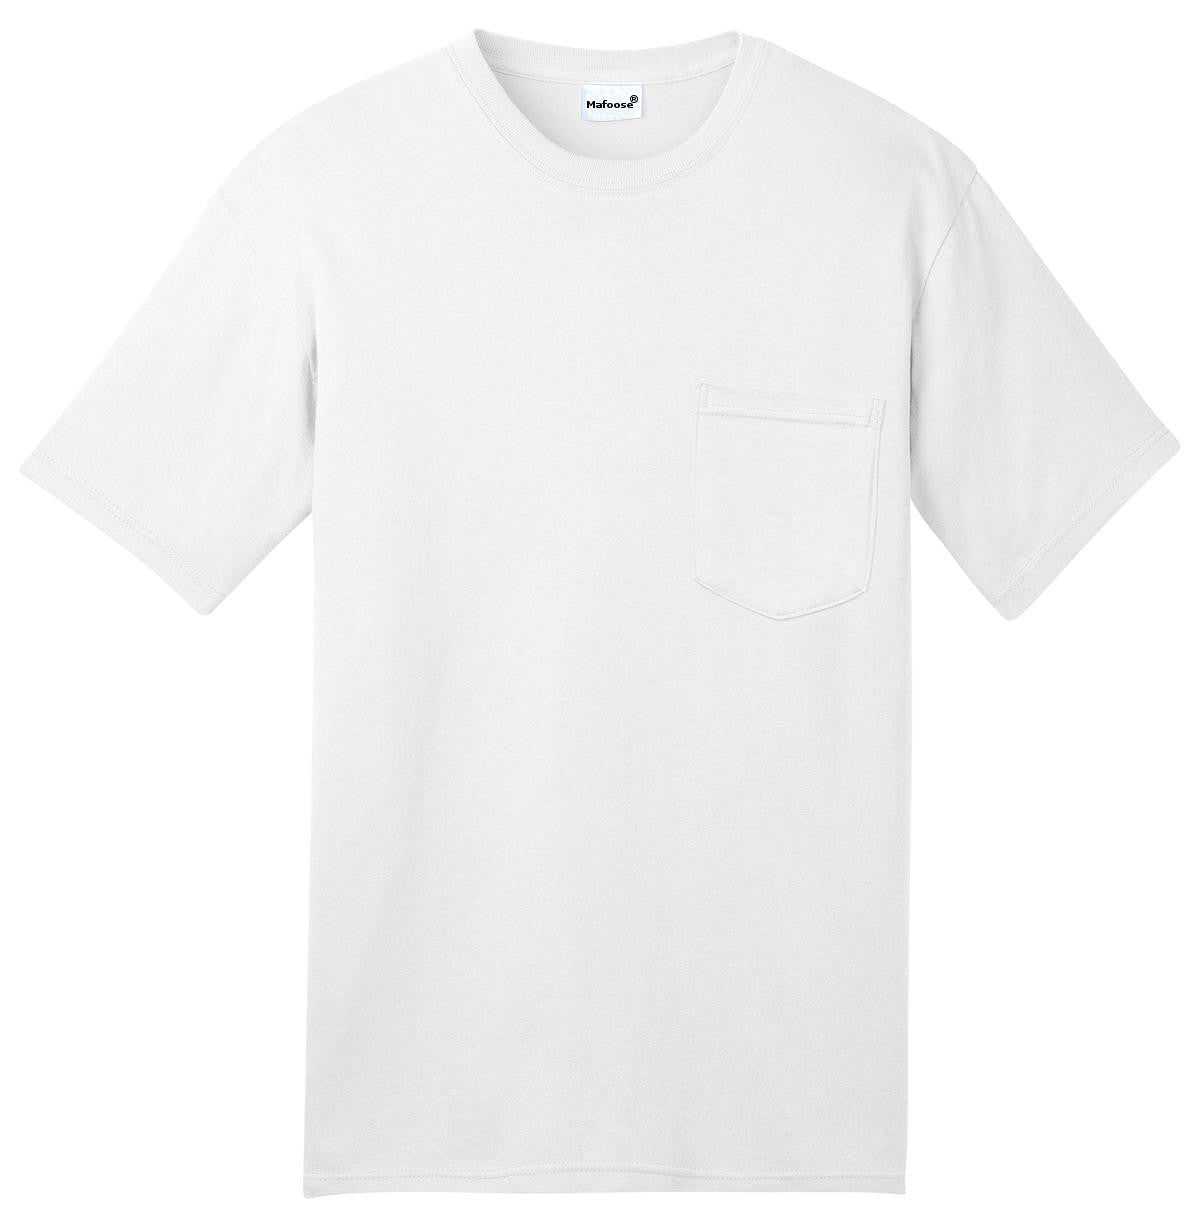 Mafoose Men's All American Tee Shirt with Pocket White-Front